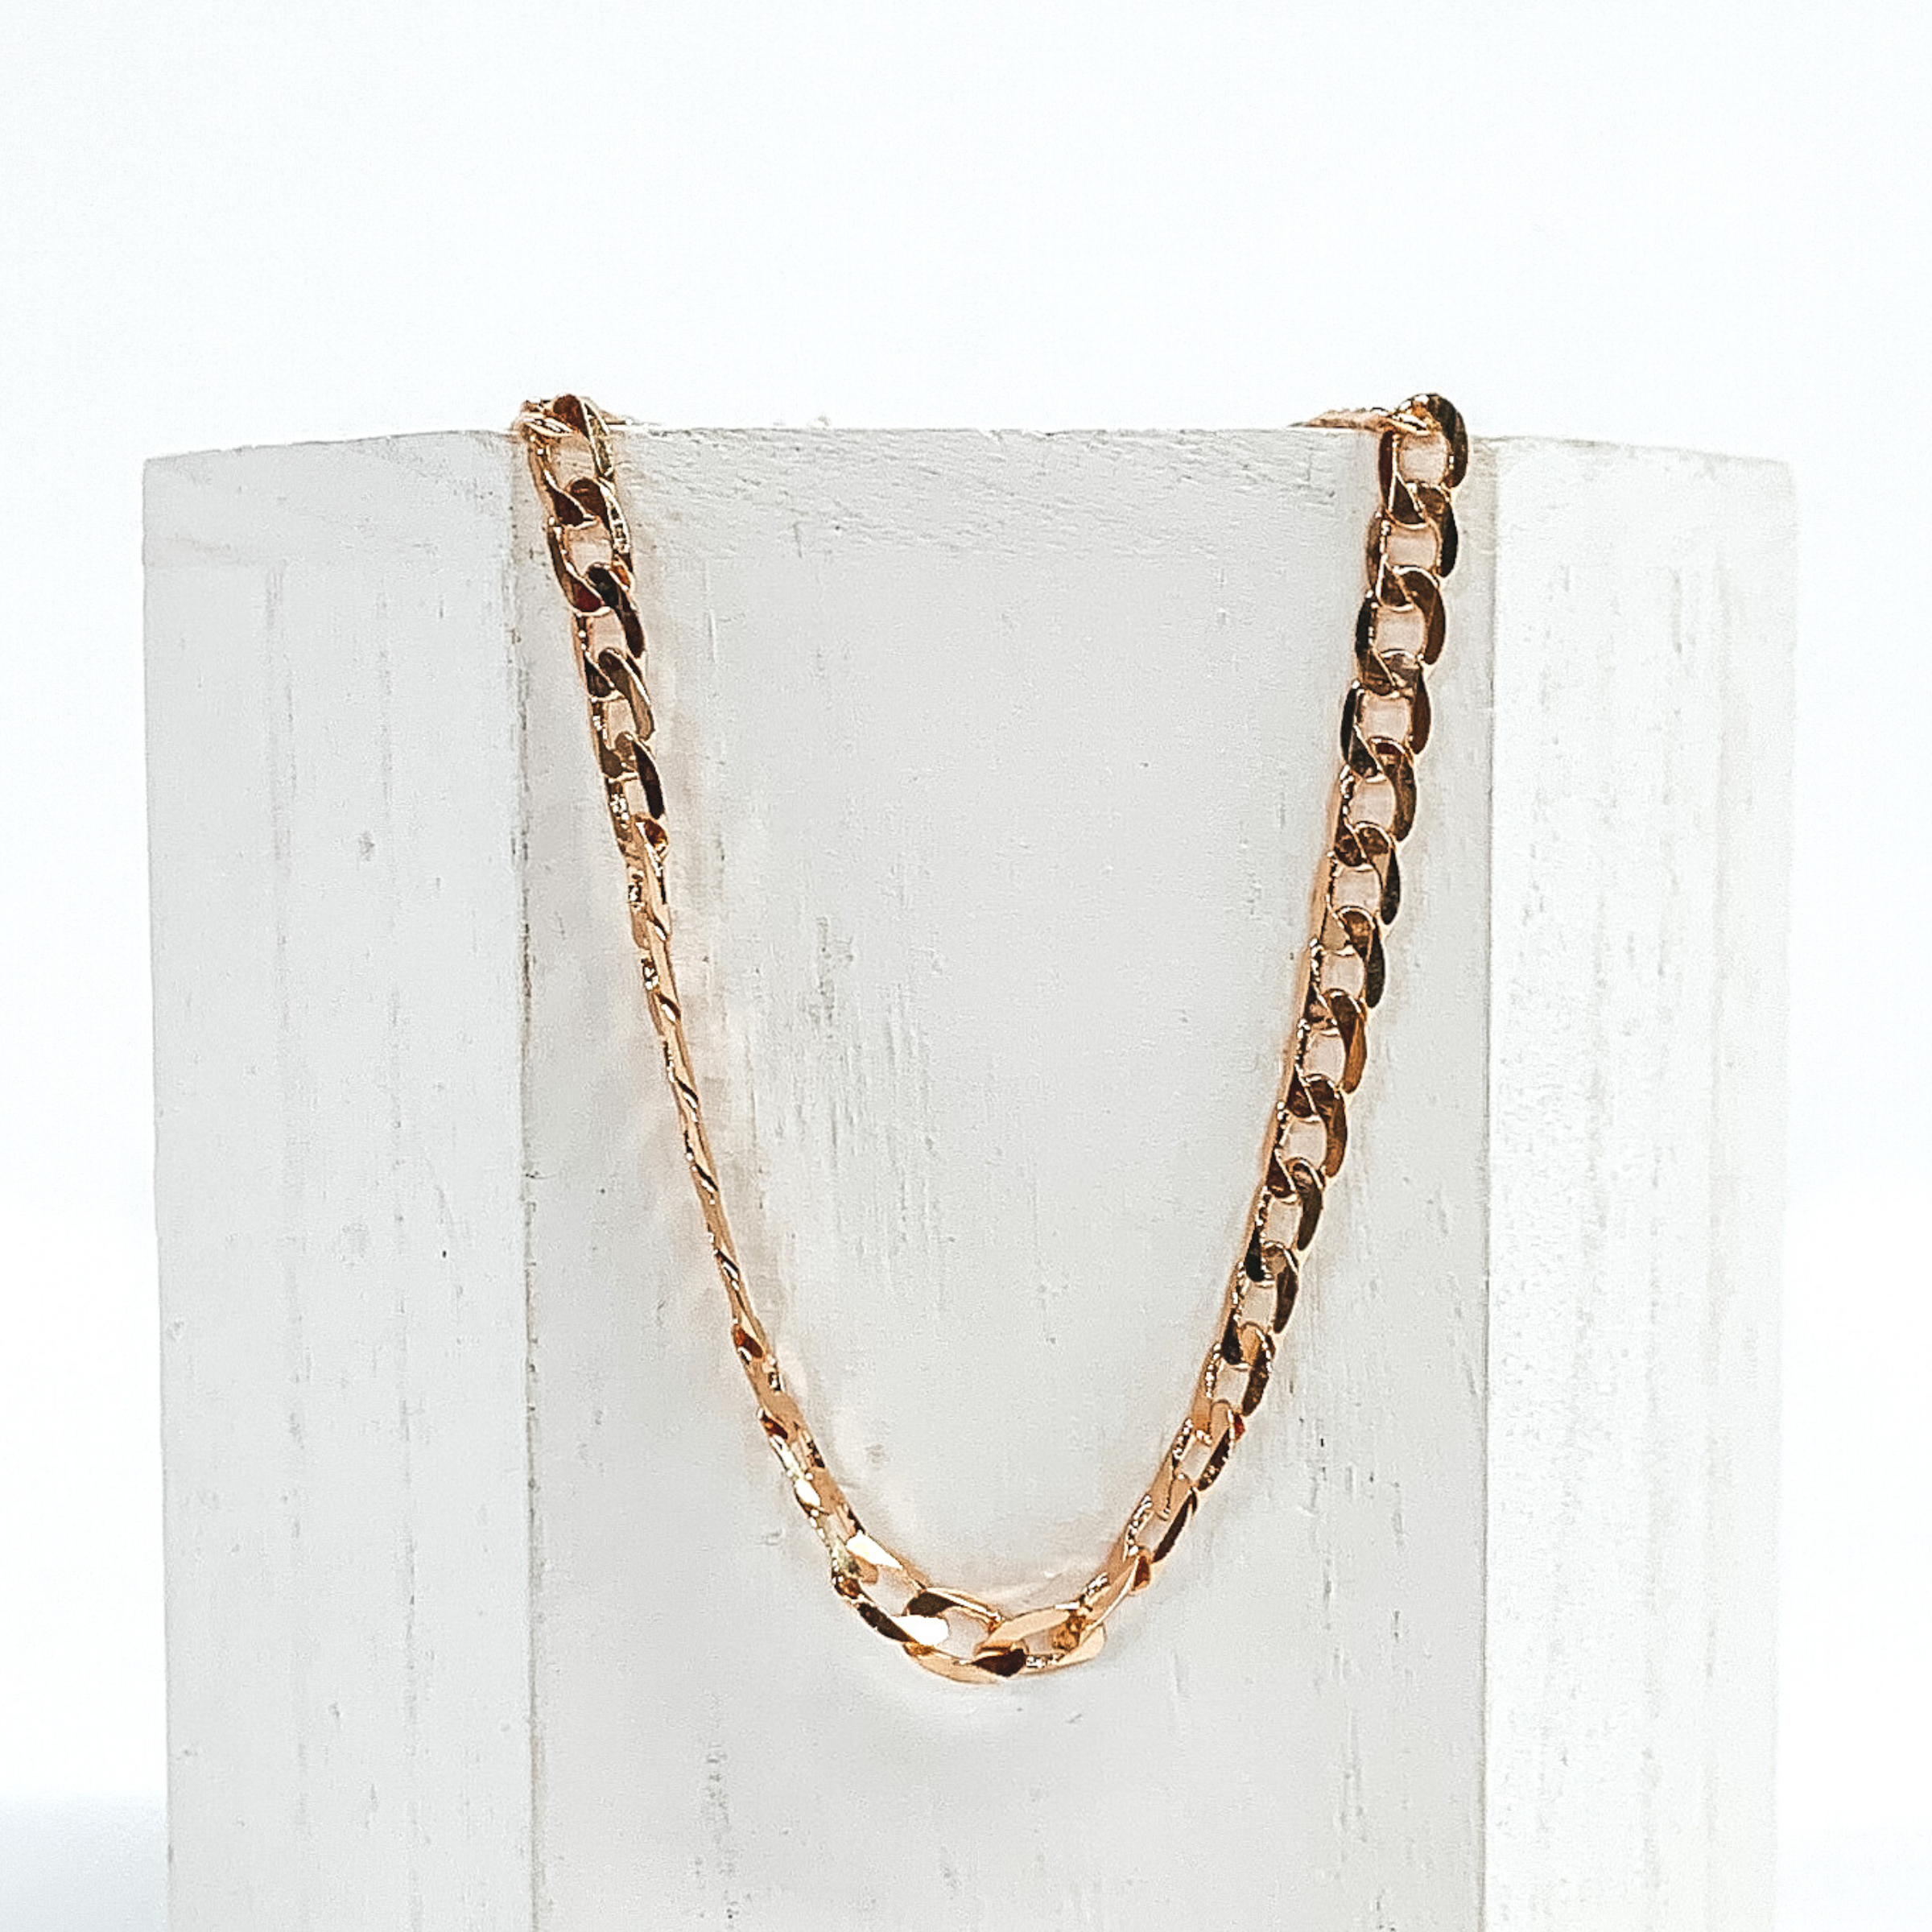 Weekend Livin' Chained Necklace in Gold - Giddy Up Glamour Boutique